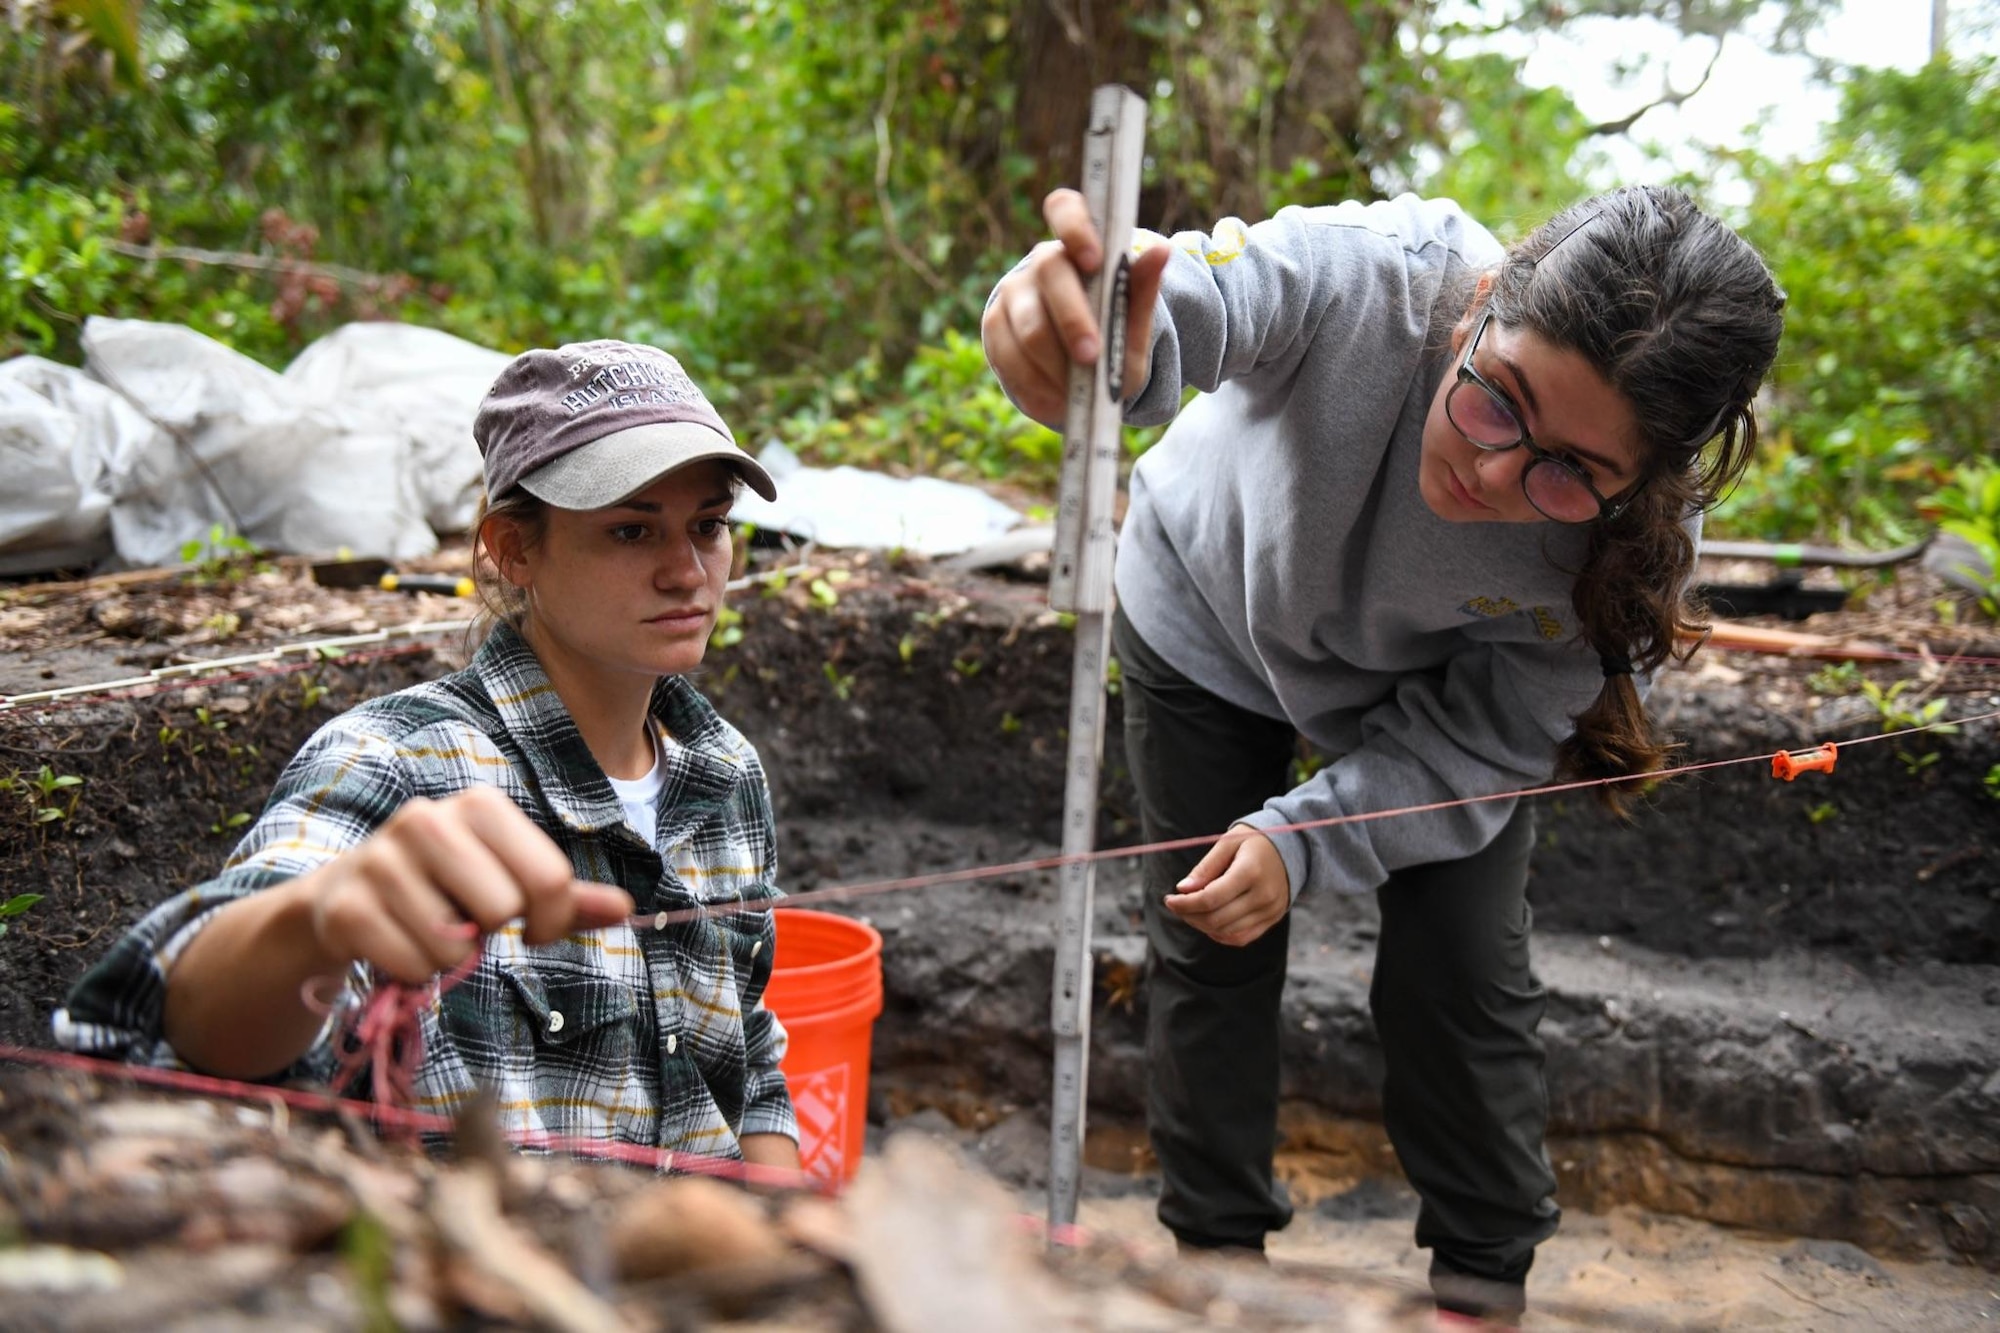 Melanie Ianggle and Cassie Hausdorf, Department of Anthropology students at University of Central Florida, use a line level to measure a surface level on April 12, 2023, at Cape Canaveral Space Force Station, Fla. Measuring surface levels allow archeologists to determine the
approximate time period they are excavating at. (U.S. Space Force photo by Senior Airman Samuel Becker)